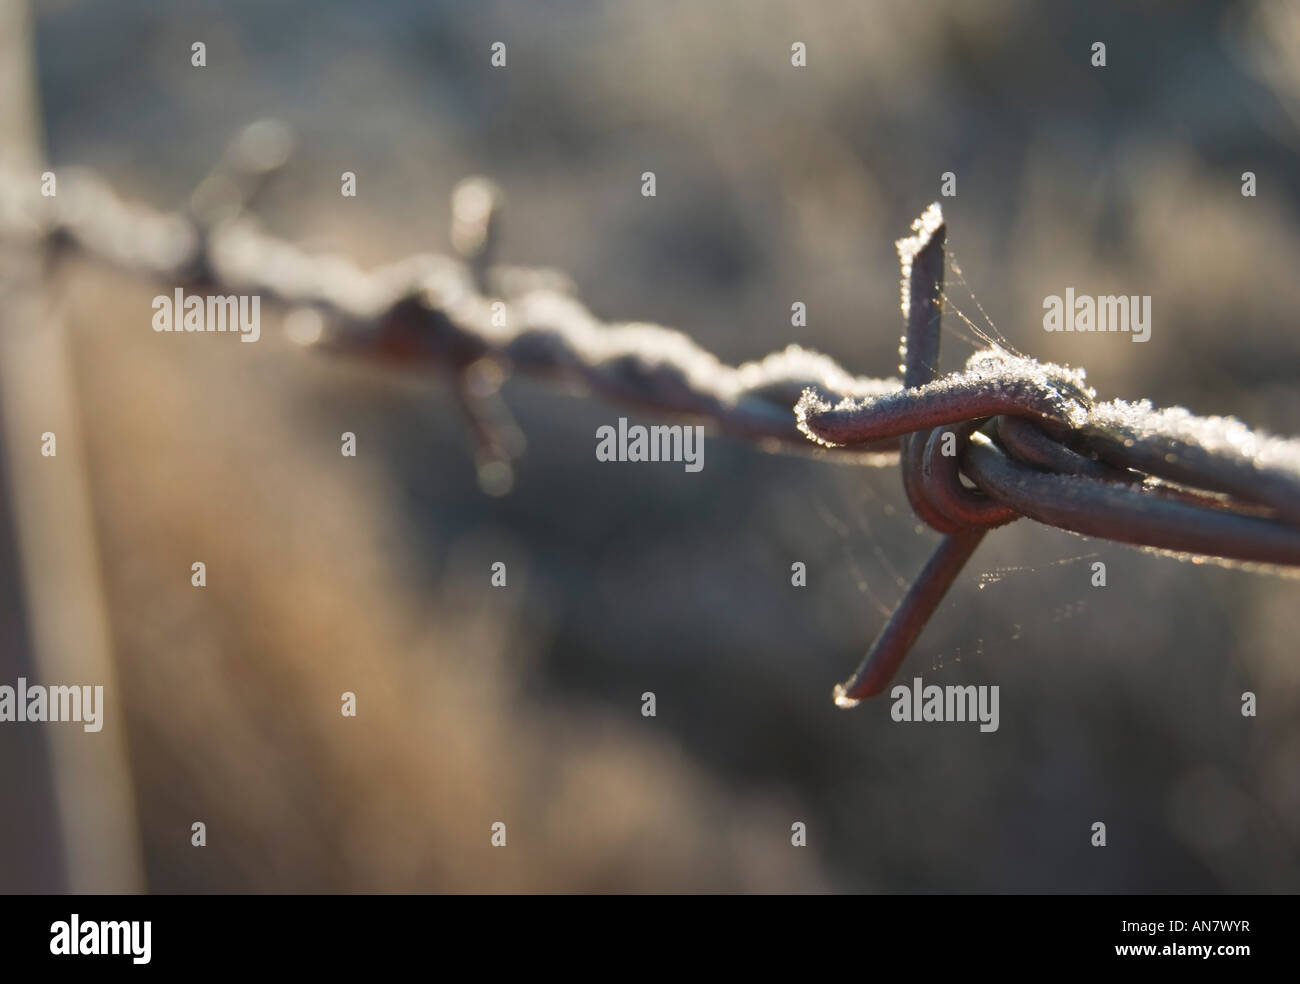 Barbed wire on a frosty day Stock Photo